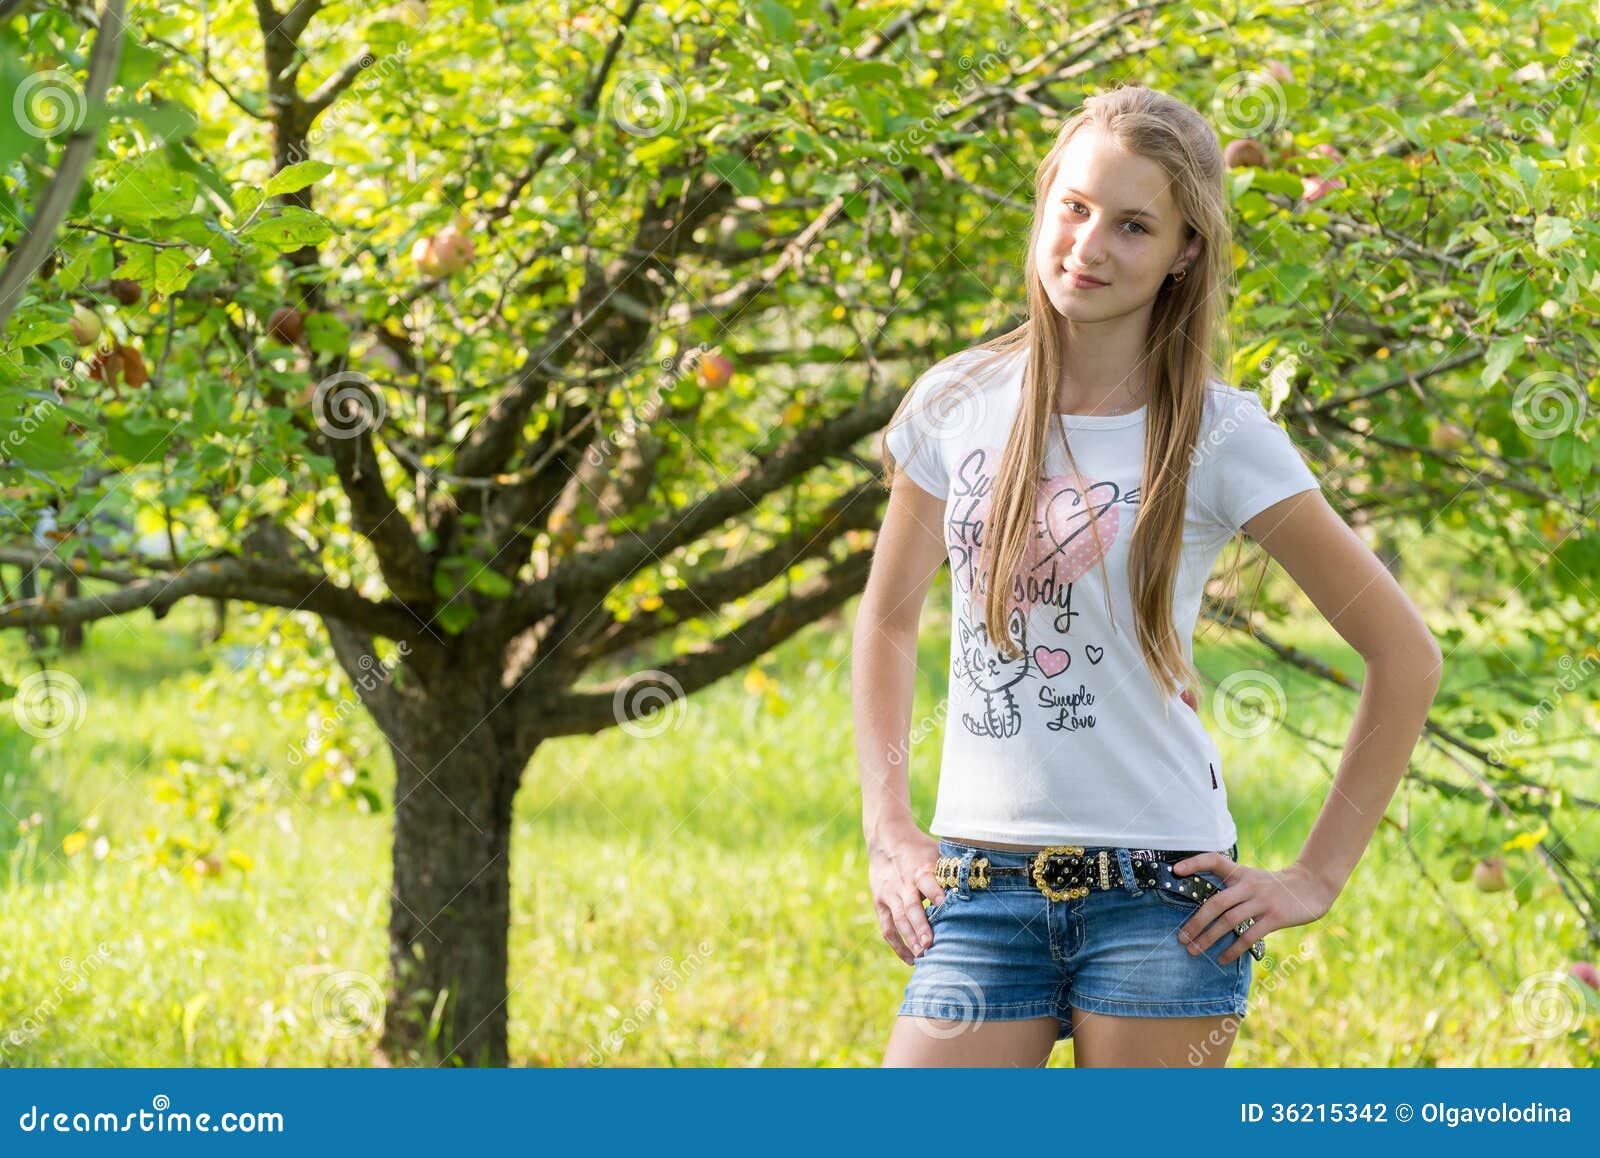 Girl in apple orchard stock photo. Image of nature, youth - 36215342